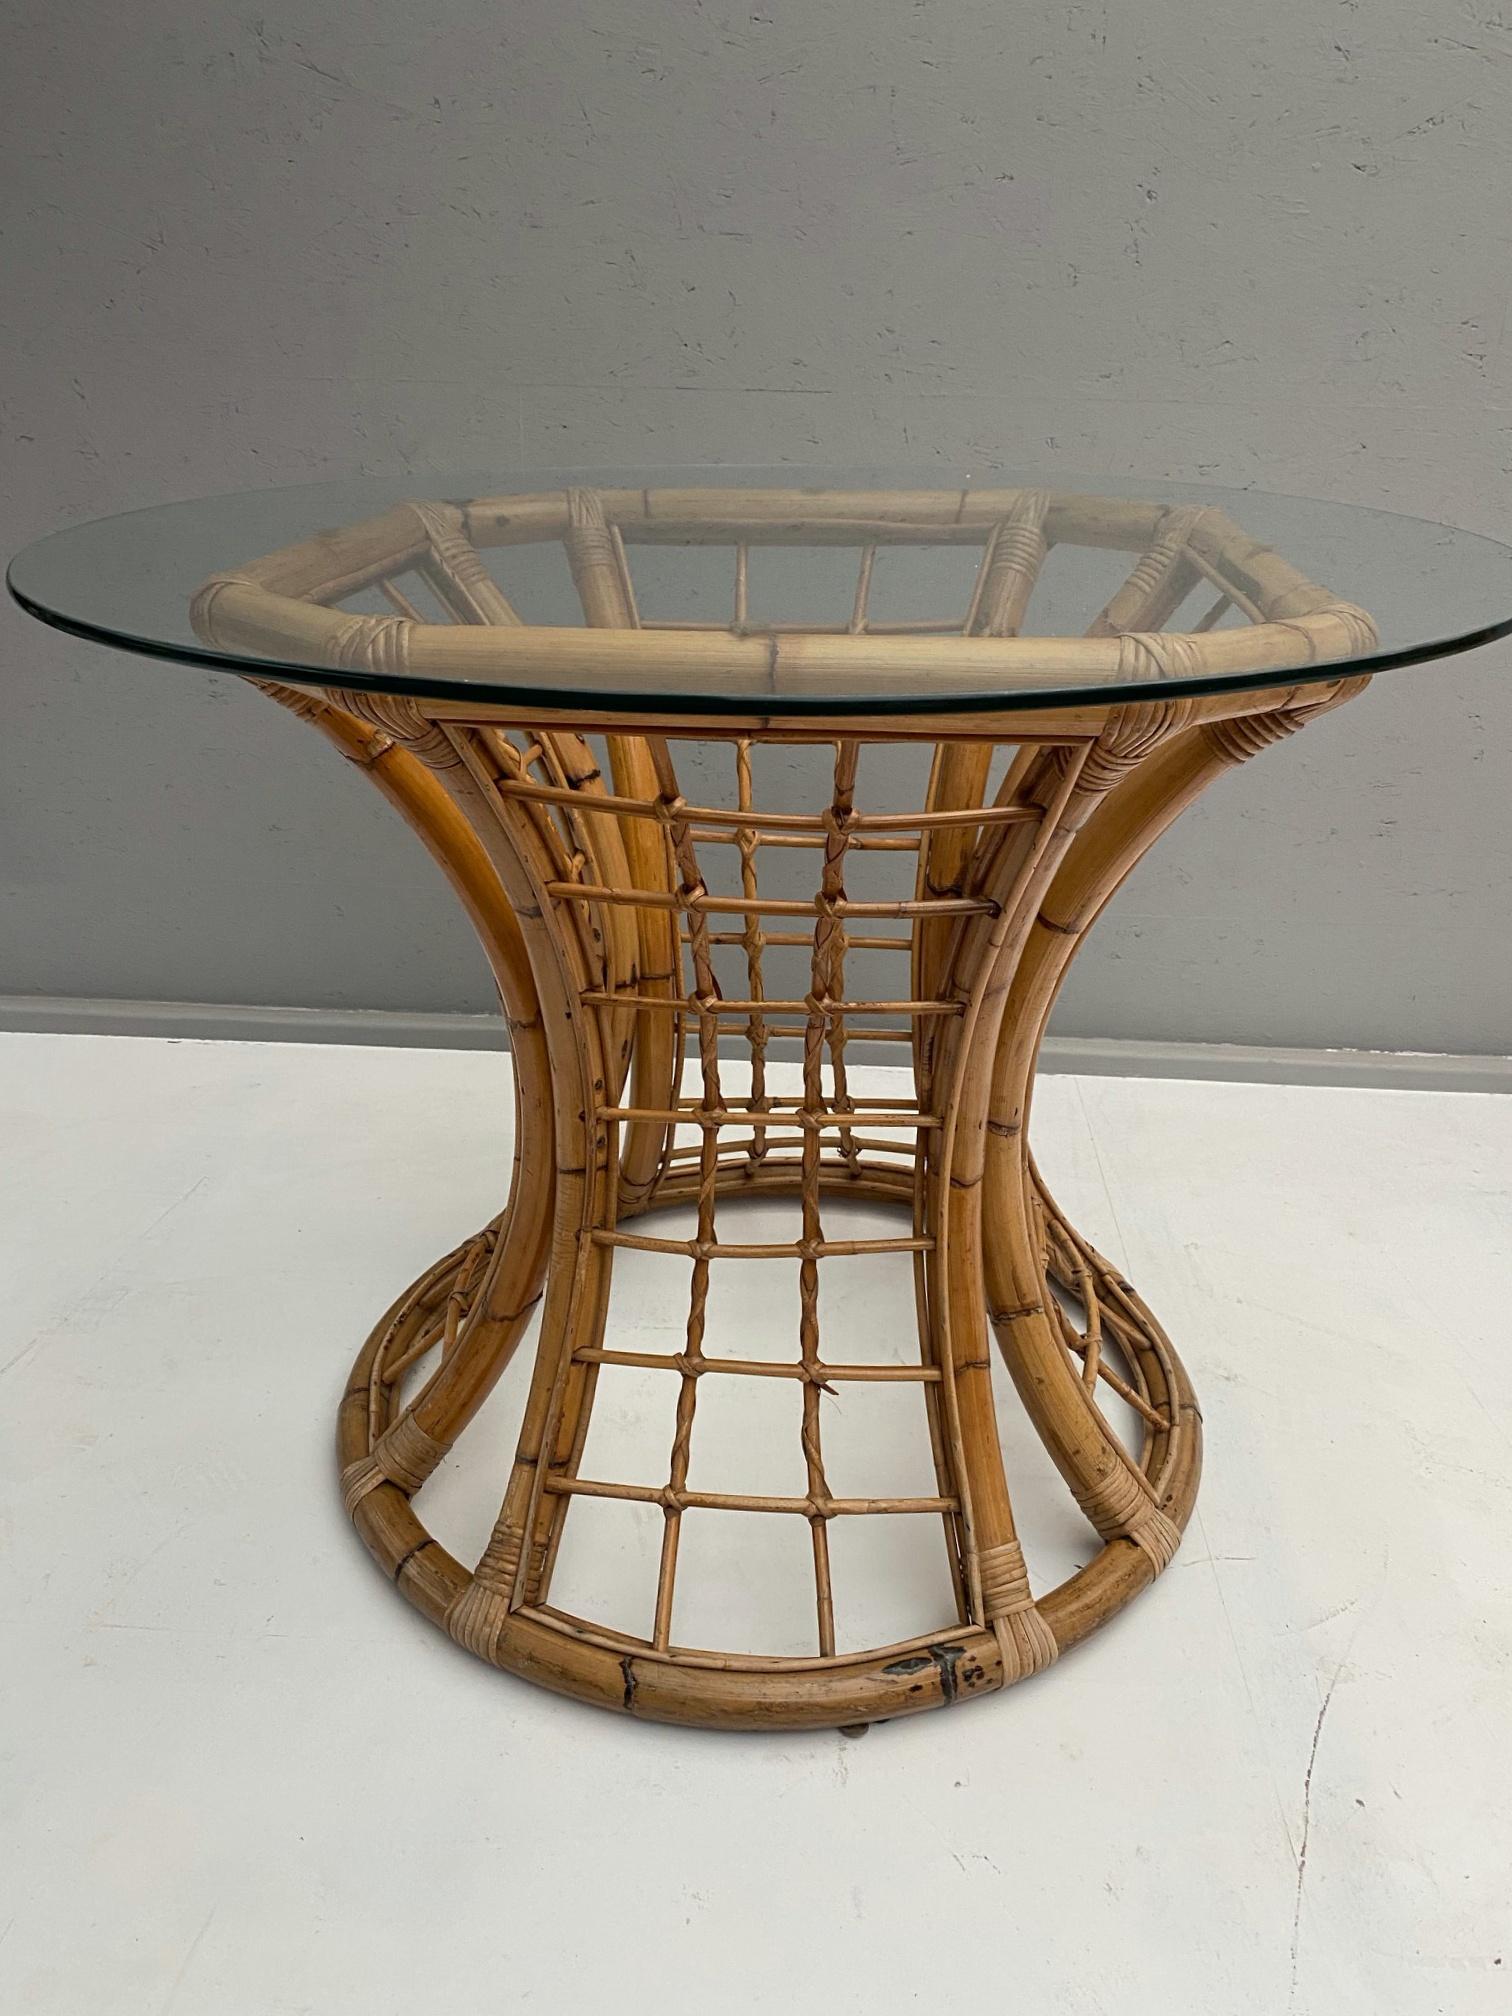 Rattan table with glass top.